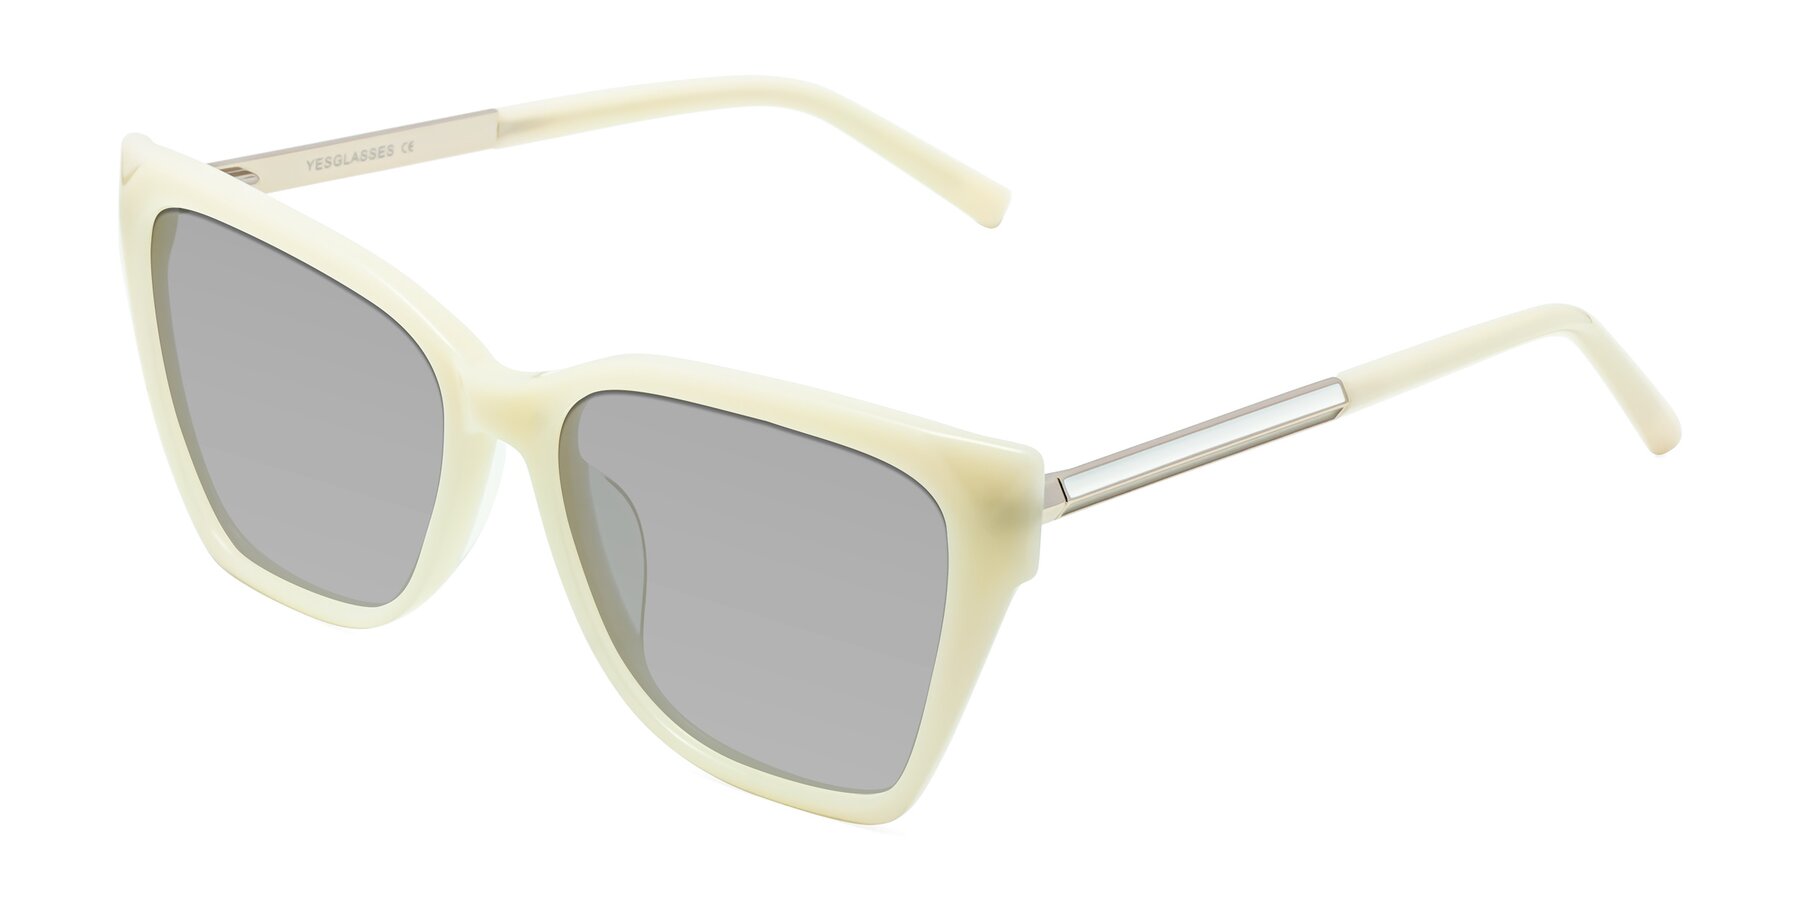 Angle of Swartz in Ivory with Light Gray Tinted Lenses